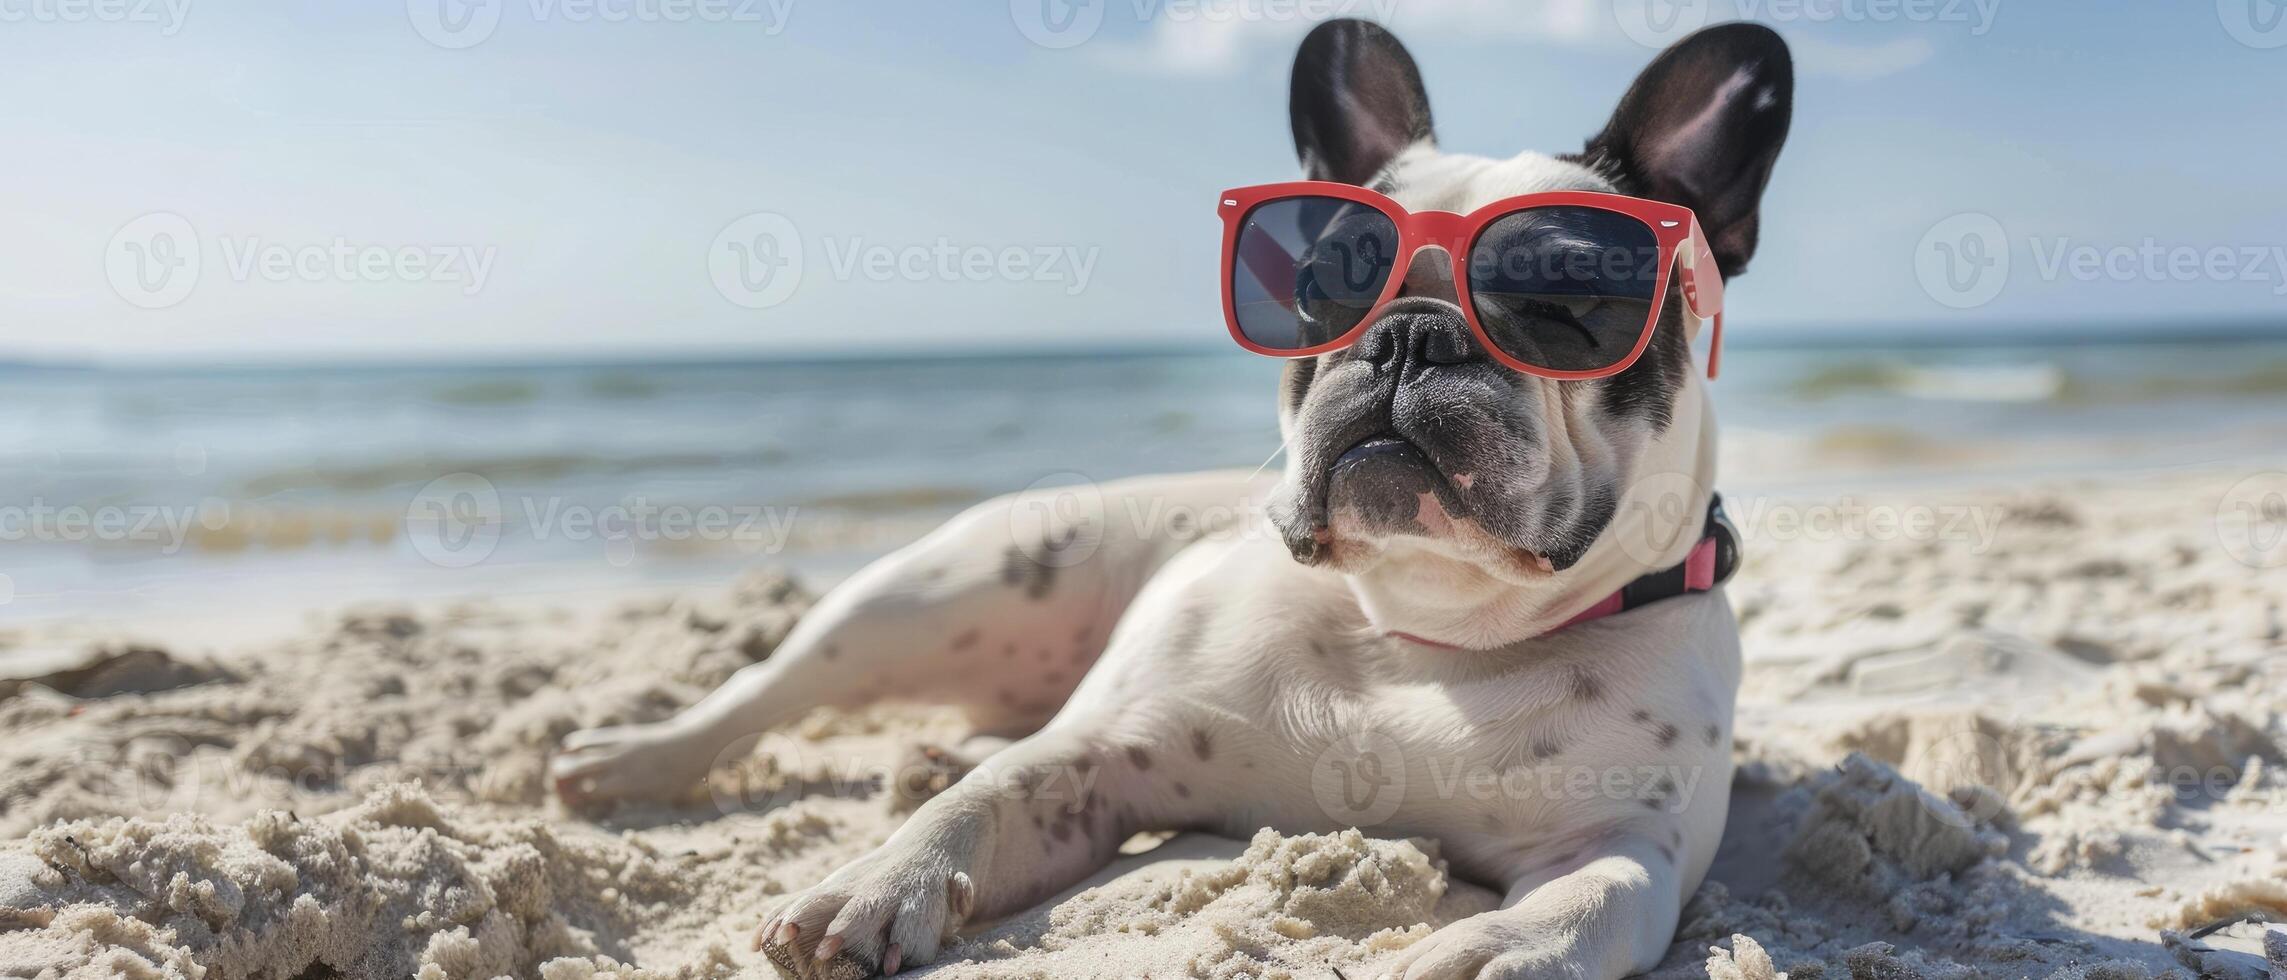 French bulldog enjoying on the sand in the ocean while wearing sunglasses photo